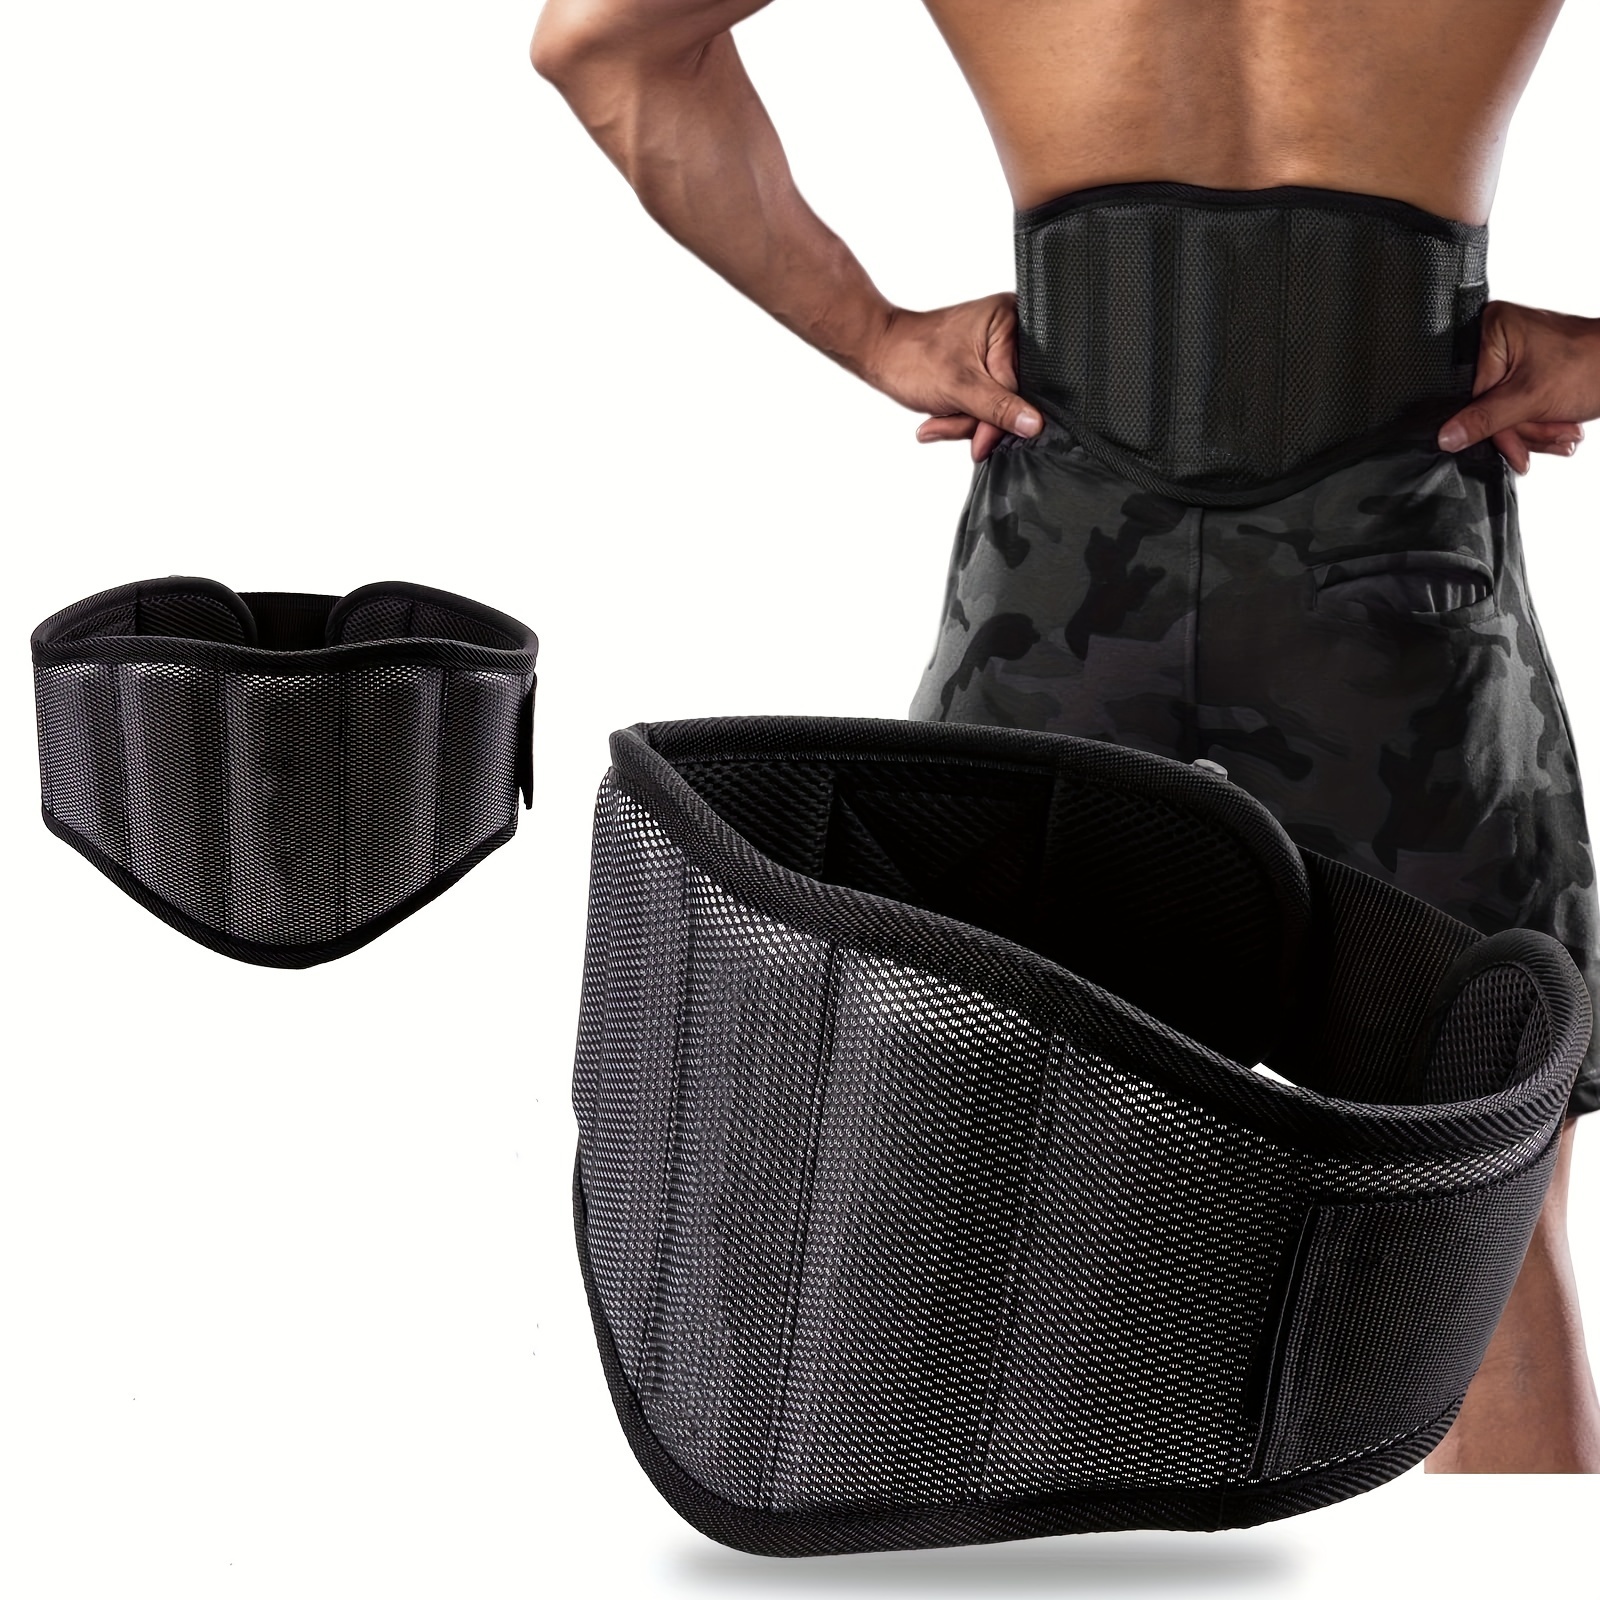 Copper Plus Gear Premium Fit Back Brace Lower Lumbar Support Belt.  Adjustable for Men and Women. Comfortable Copper Infused Back Wrap Perfect  for